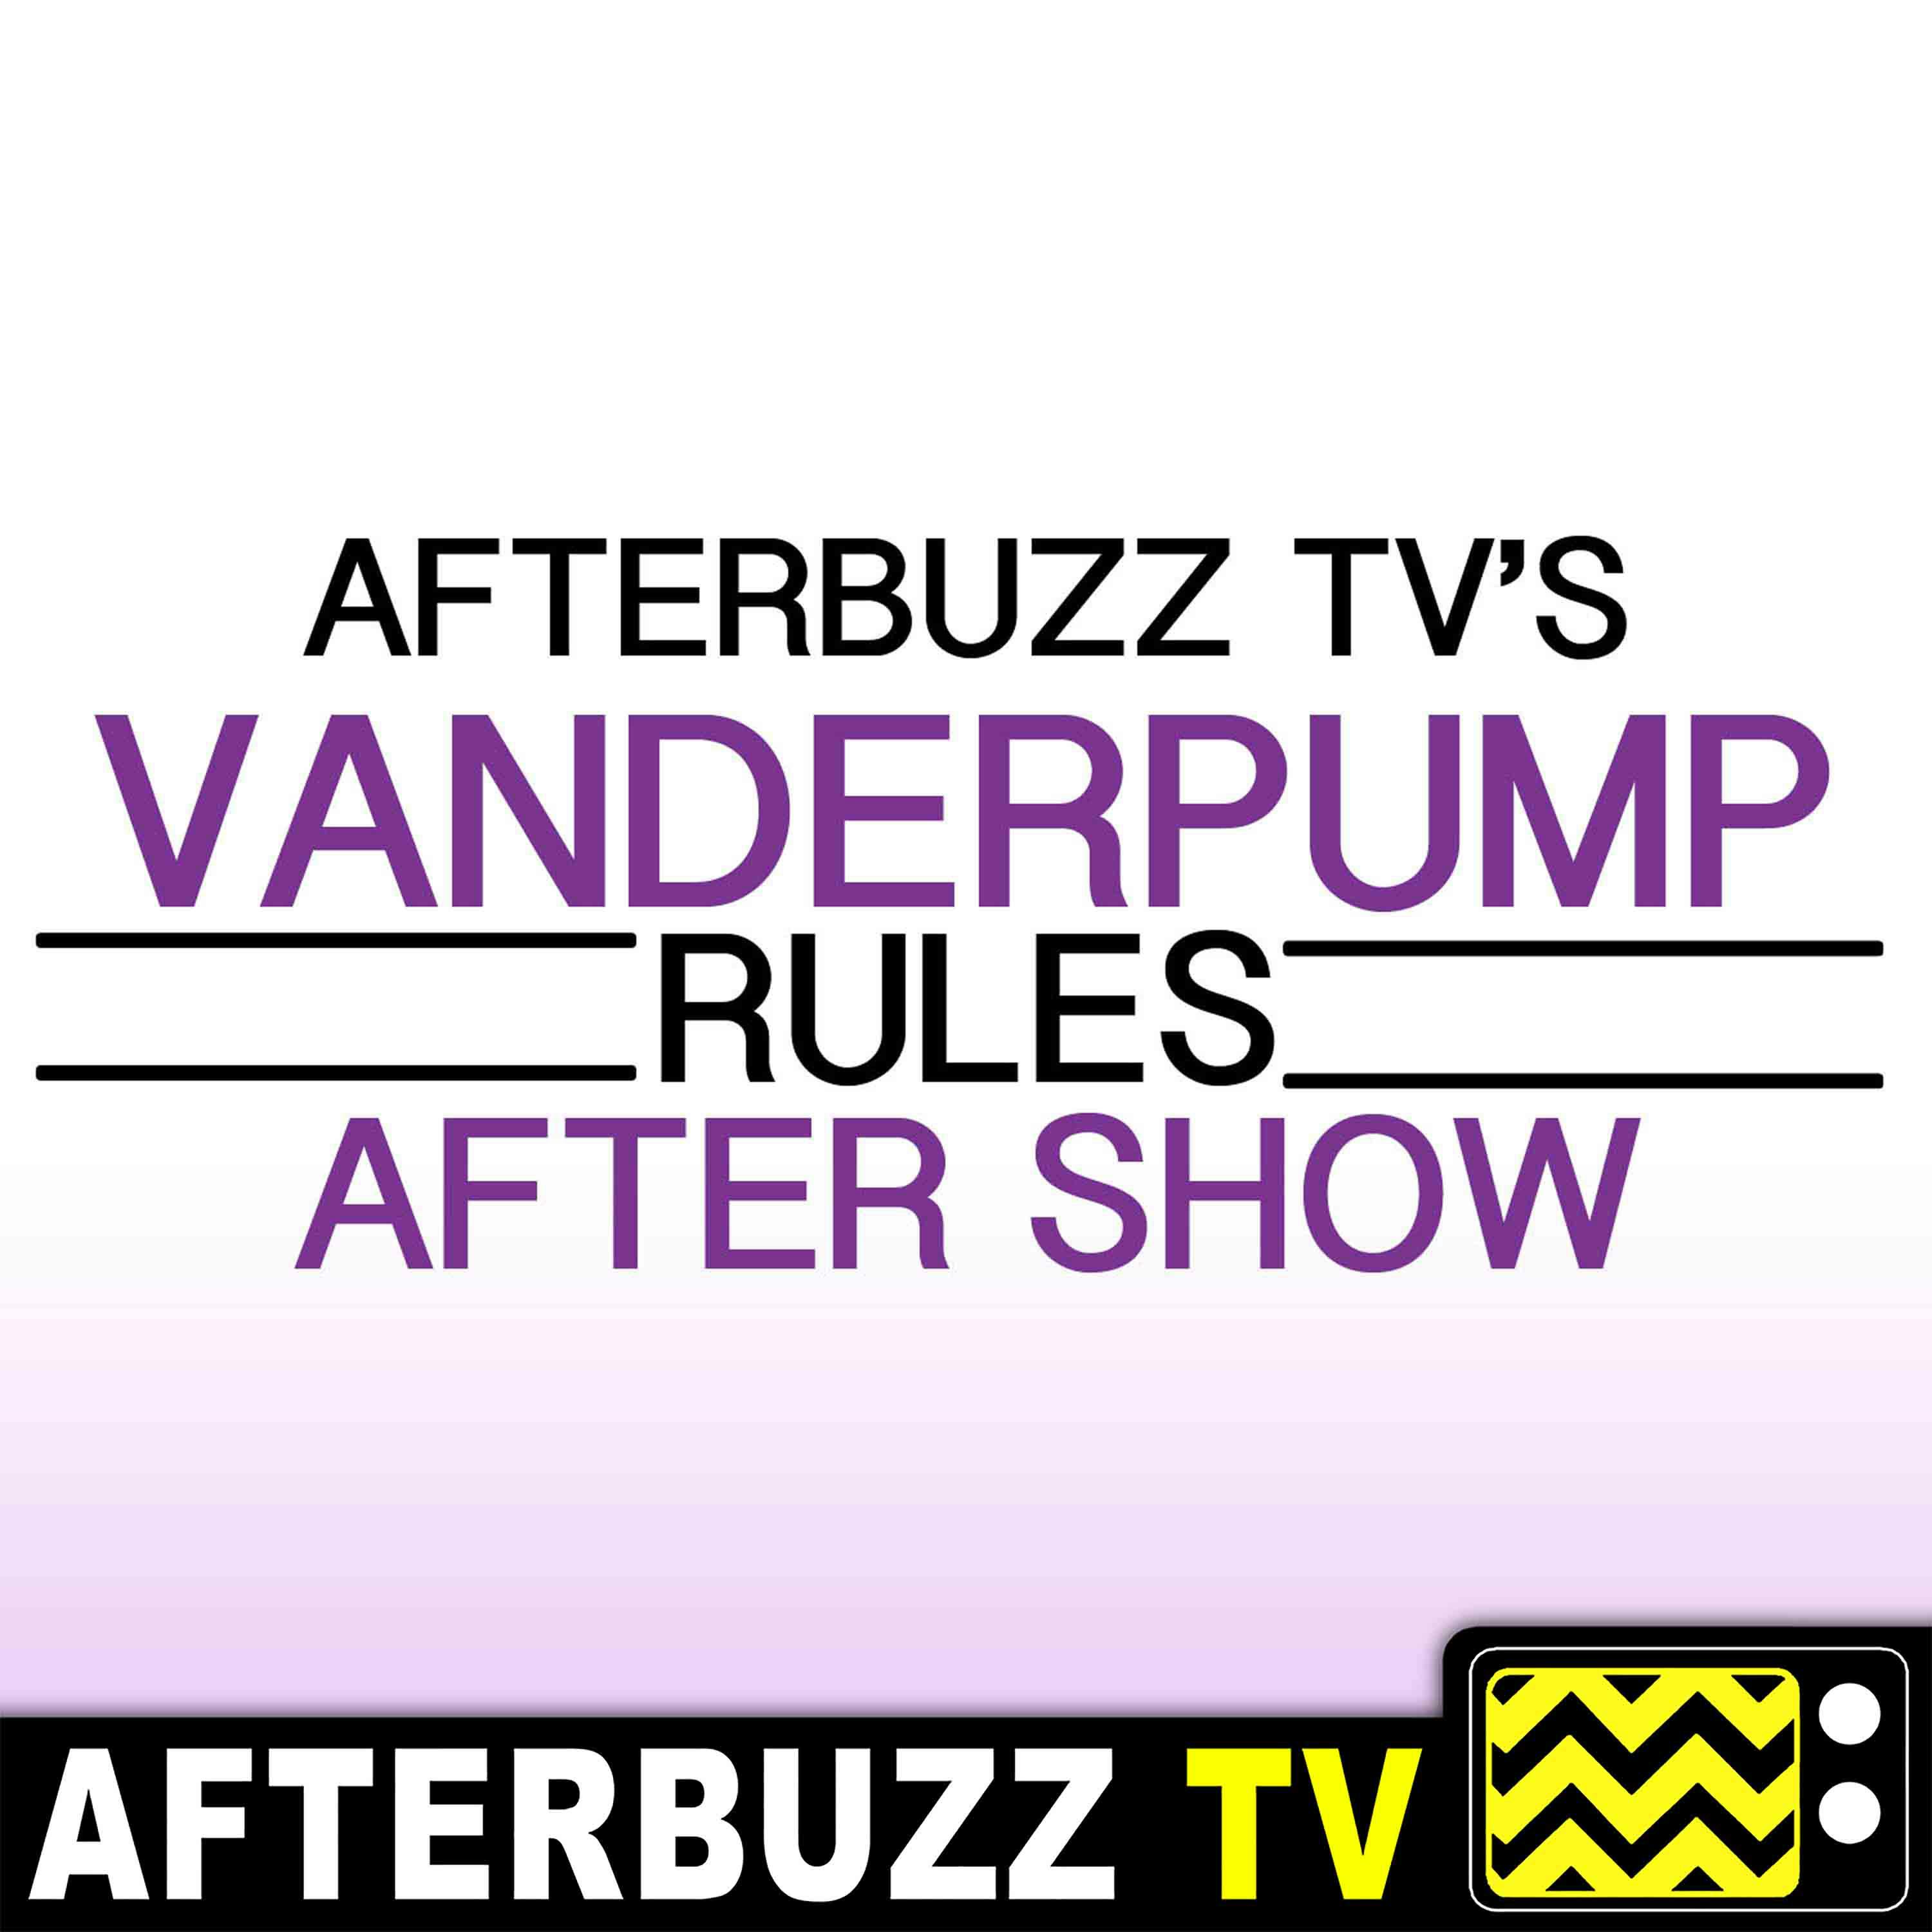 Reactions to Firings – Vanderpump Rules Special | AfterBuzz TV